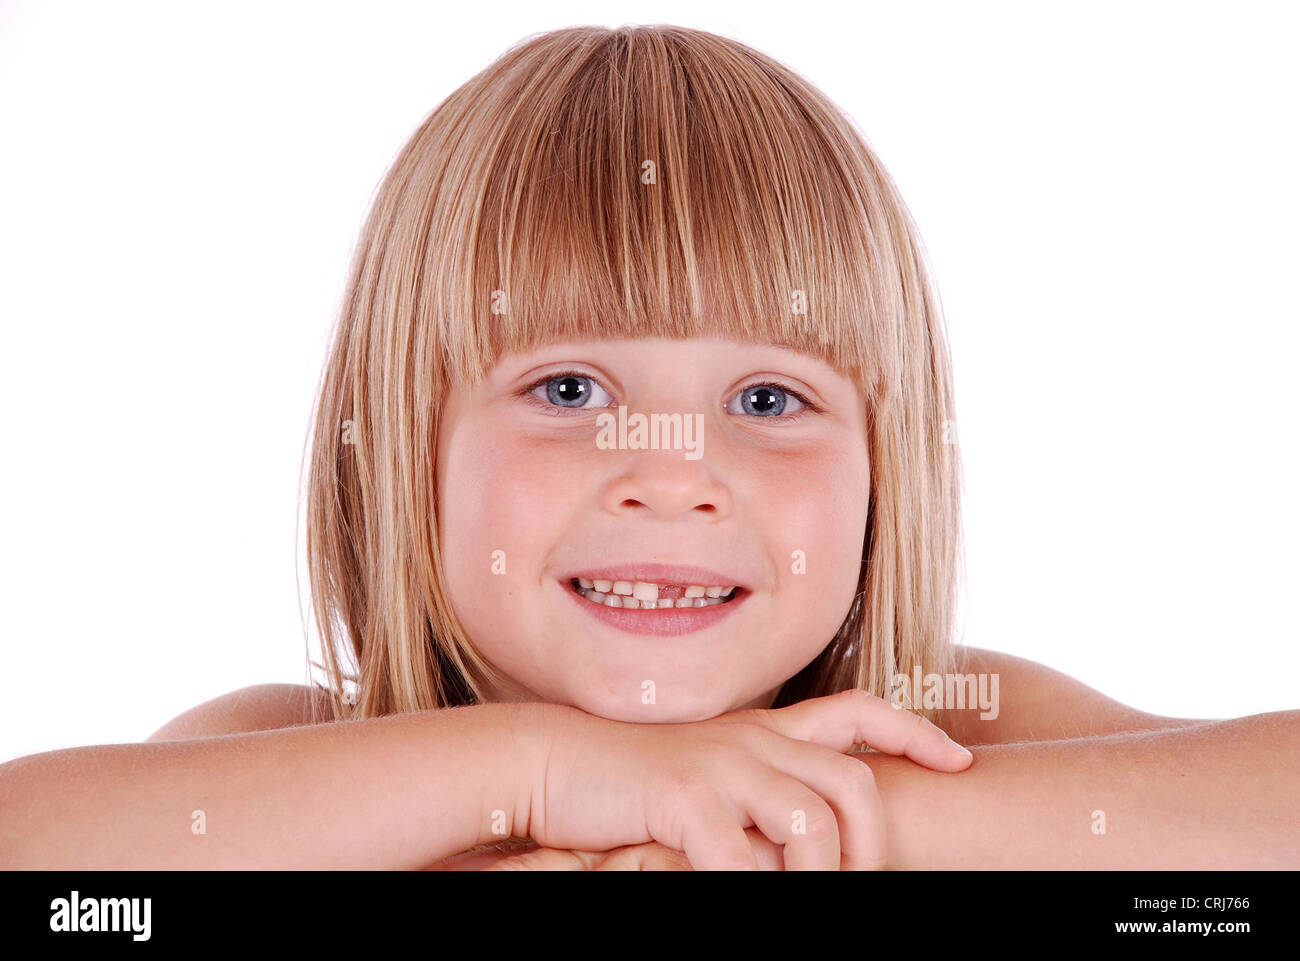 little girl with with straight blond hair in pageboy style Stock Photo